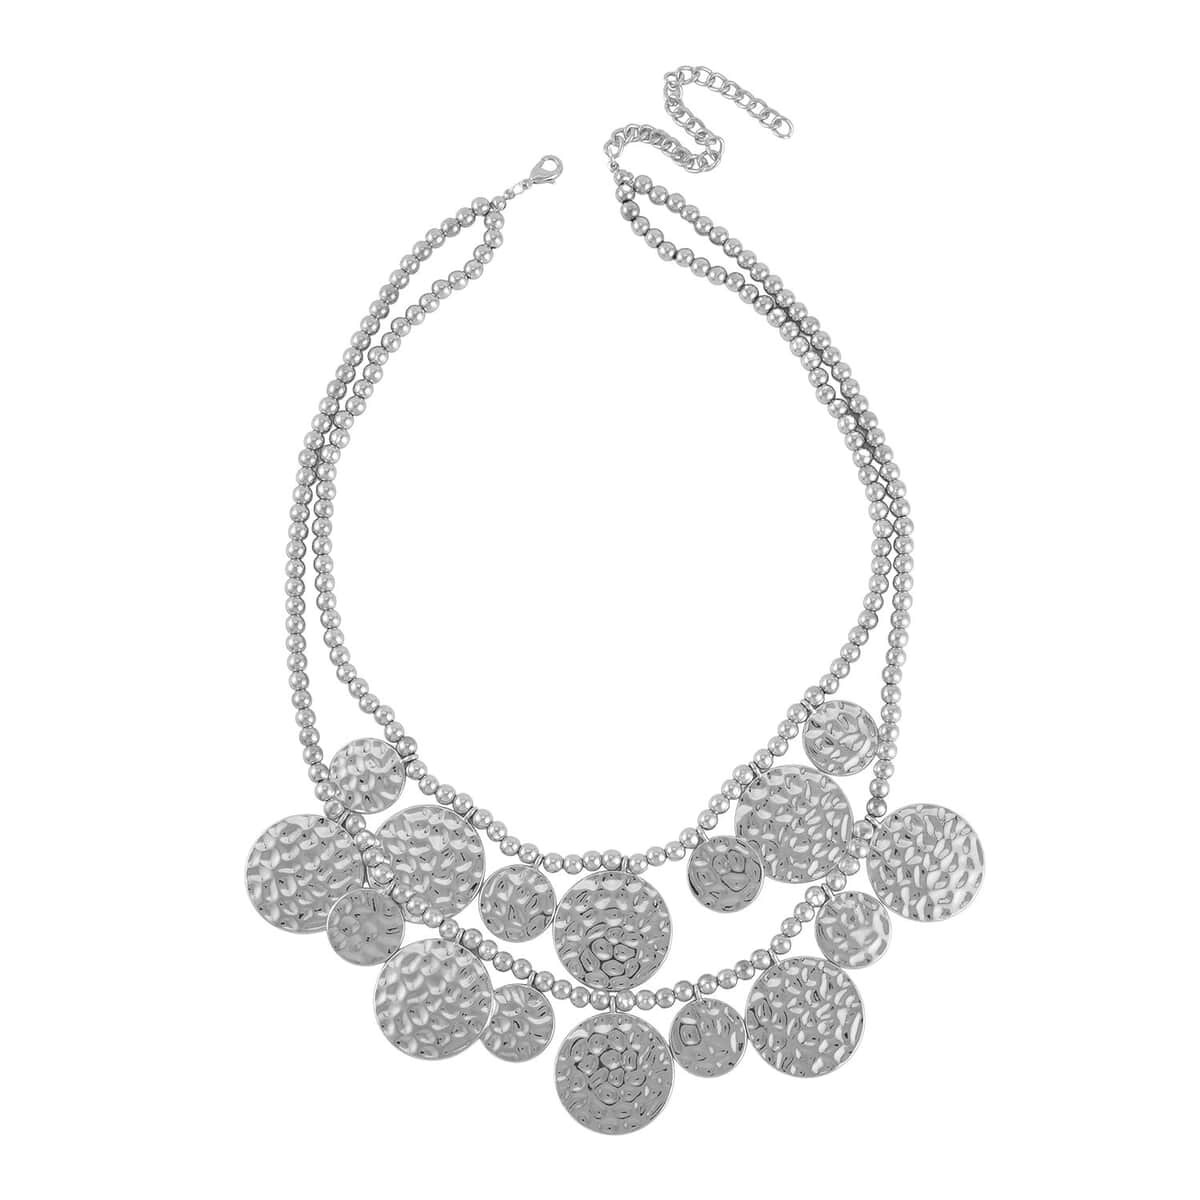 Hammer Textured Necklace 18-22 Inches and Earrings in Silvertone image number 3